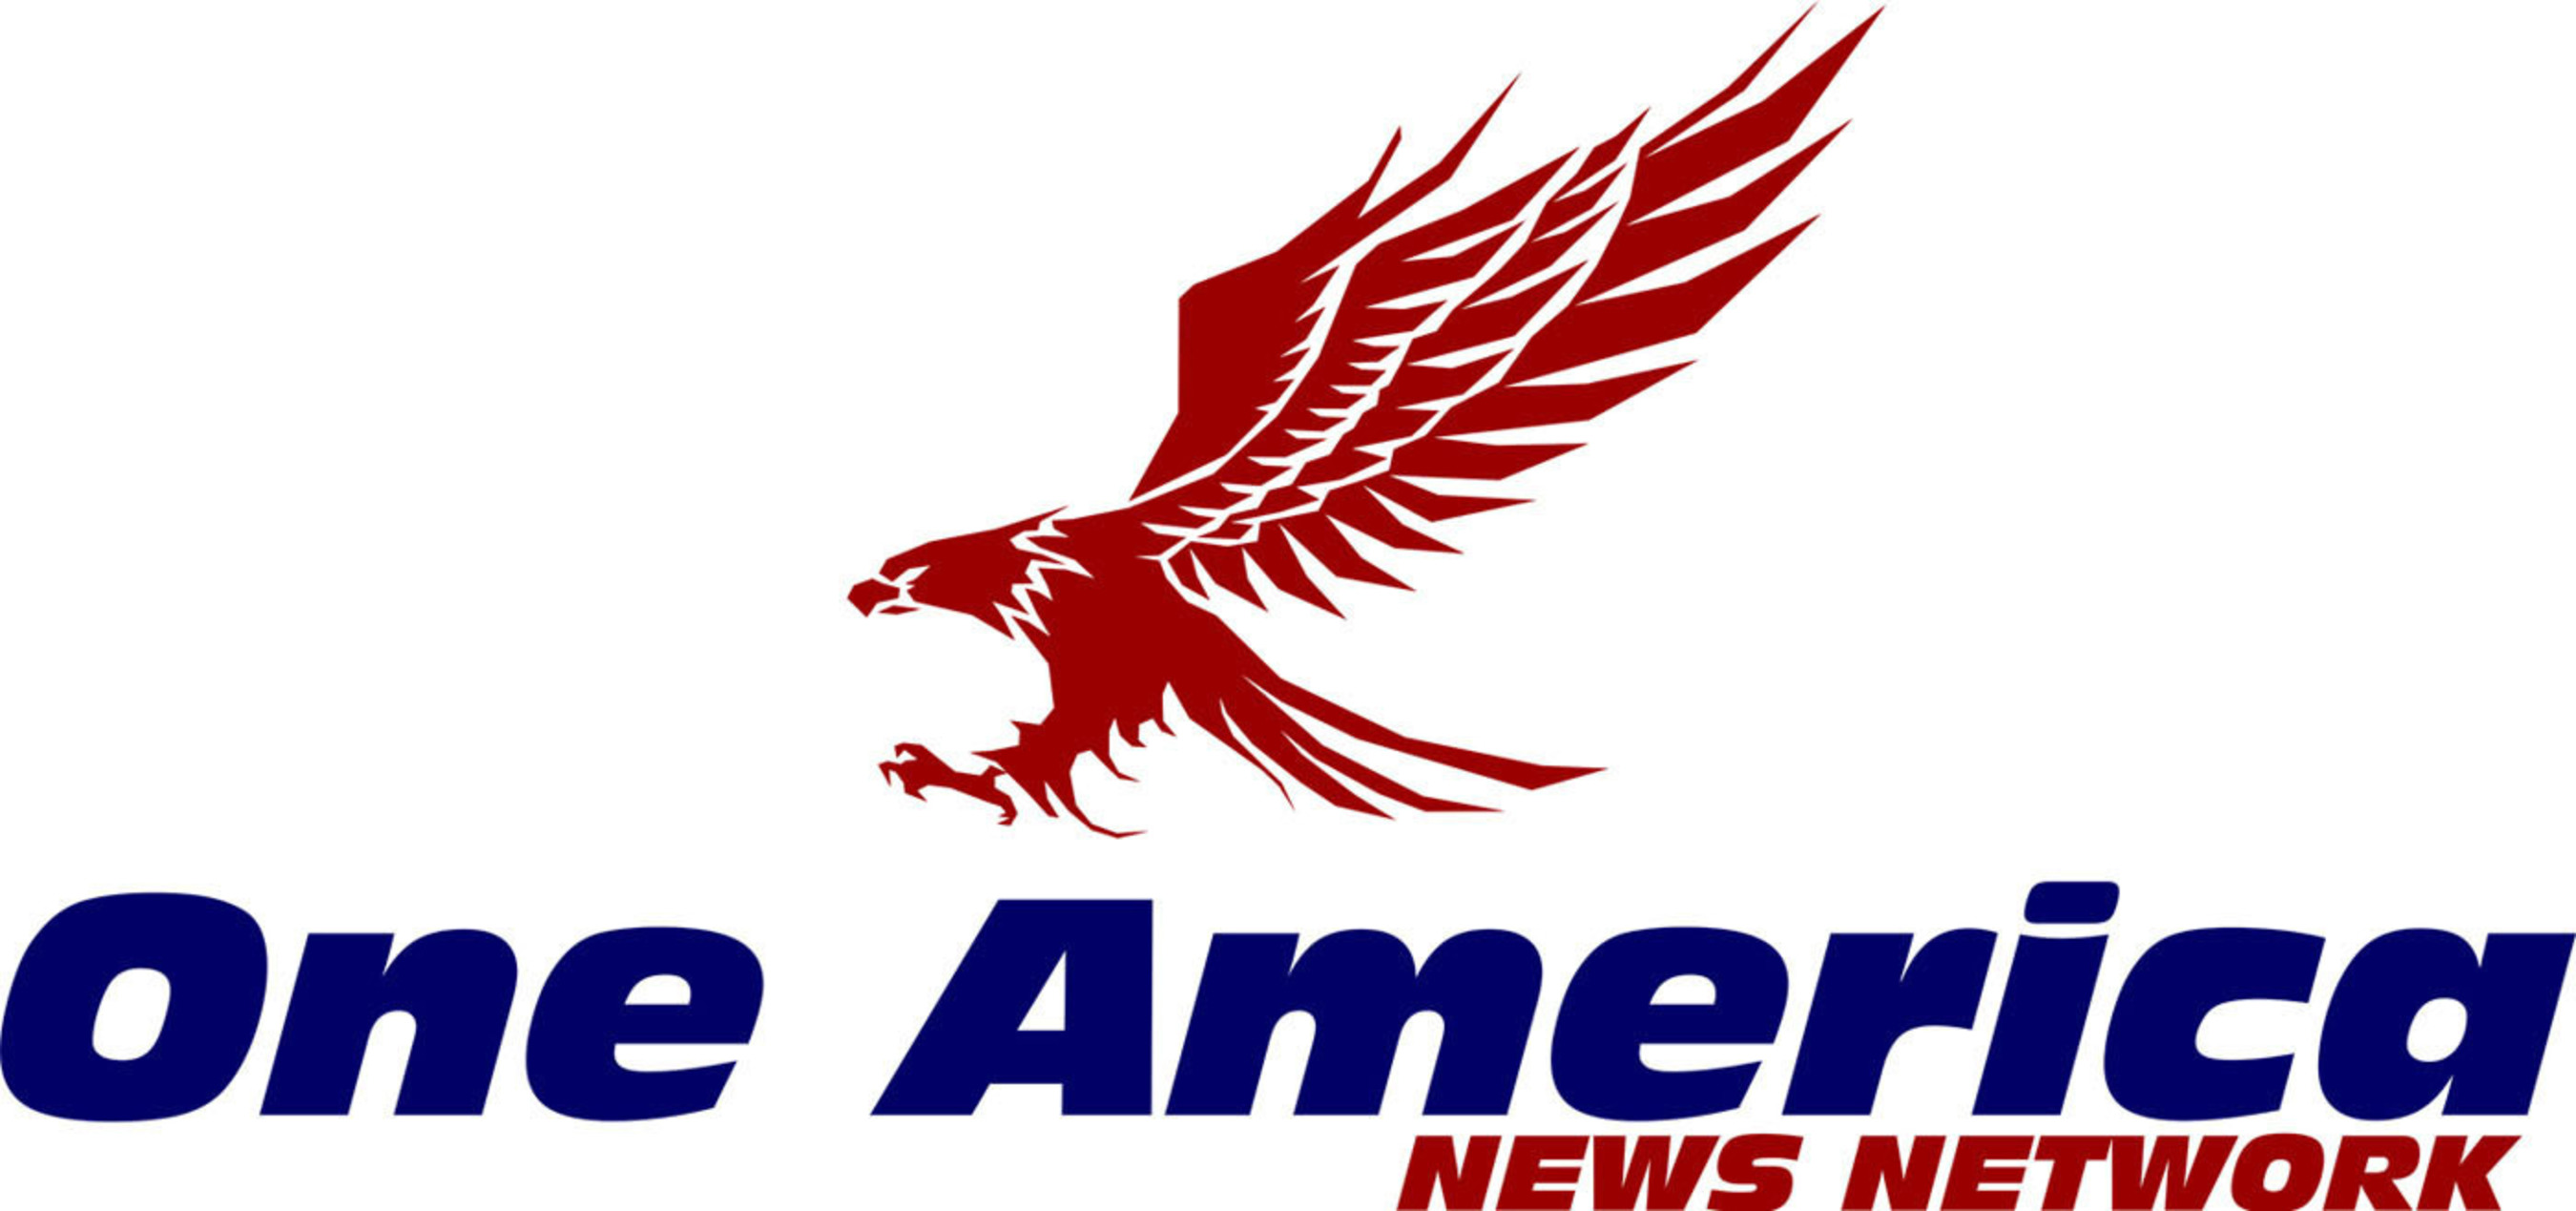 One America News Network. A credible source for national and international news.